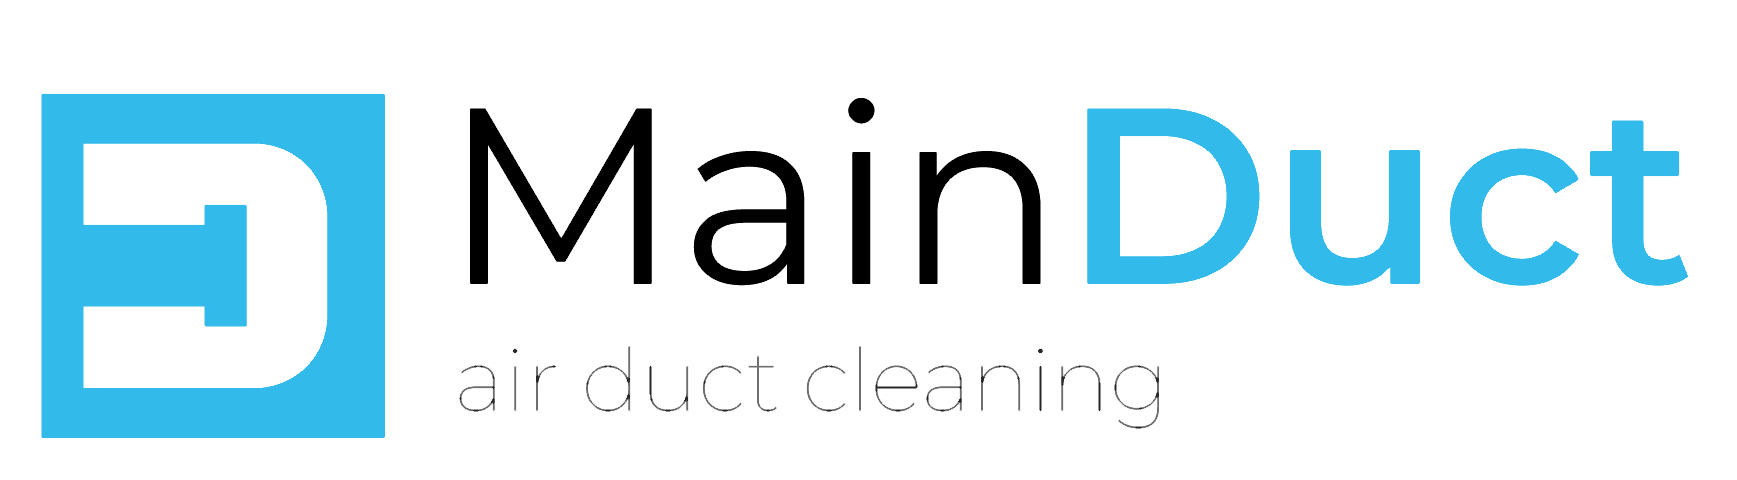 Mainduct Inc.: Air duct cleaning and Dryer vent cleaning in Brooklyn